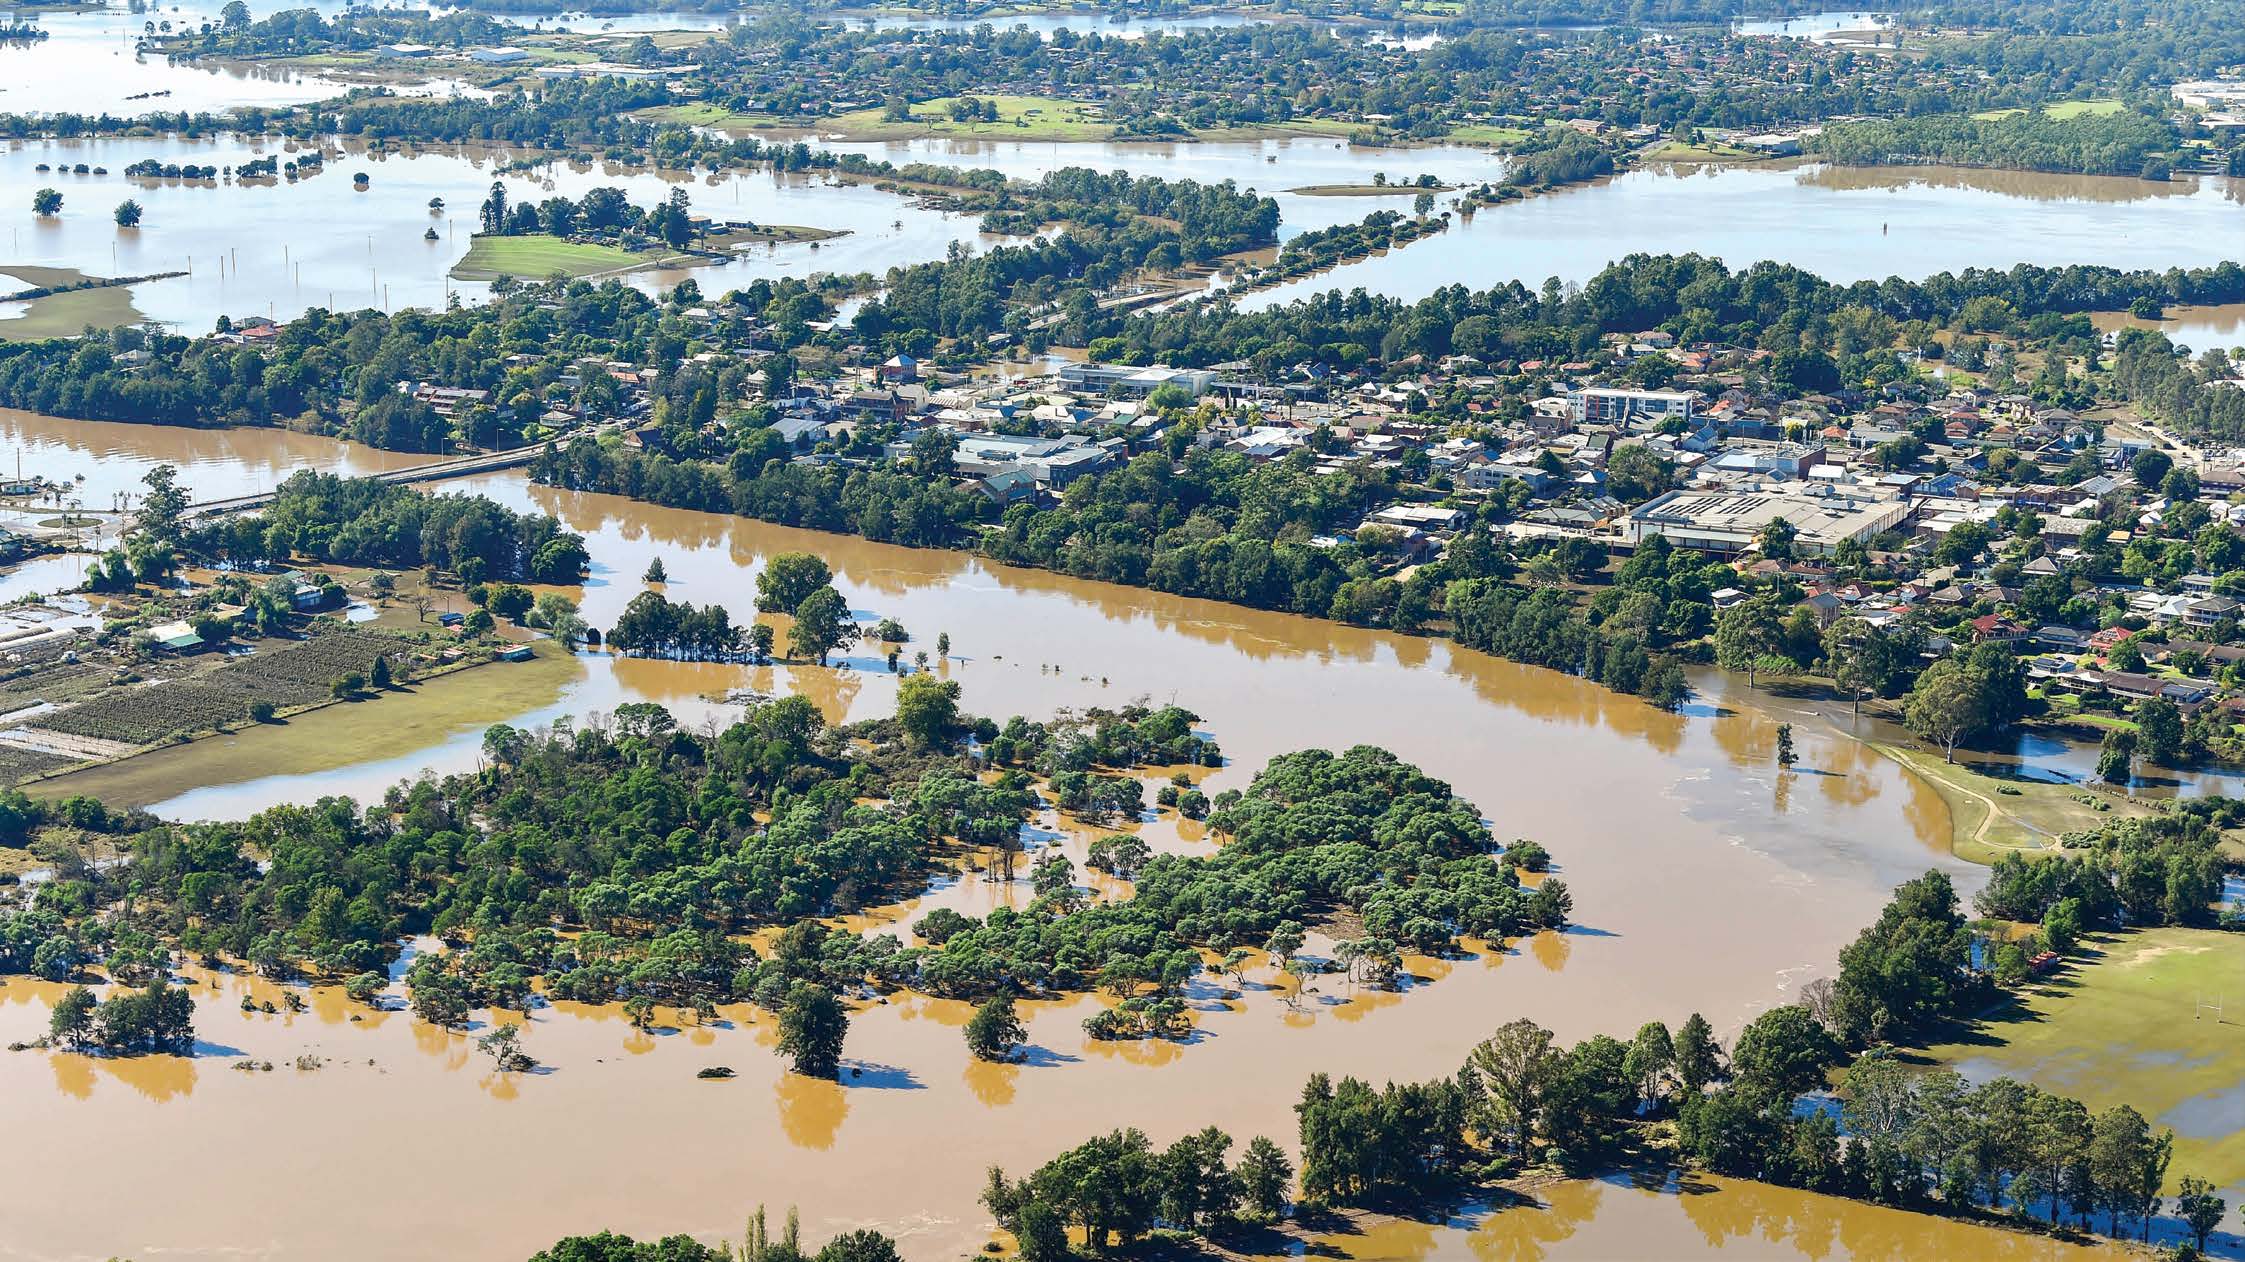 Nepean River Water Level in Sydney July 2022,Nepean River Flooding 2022